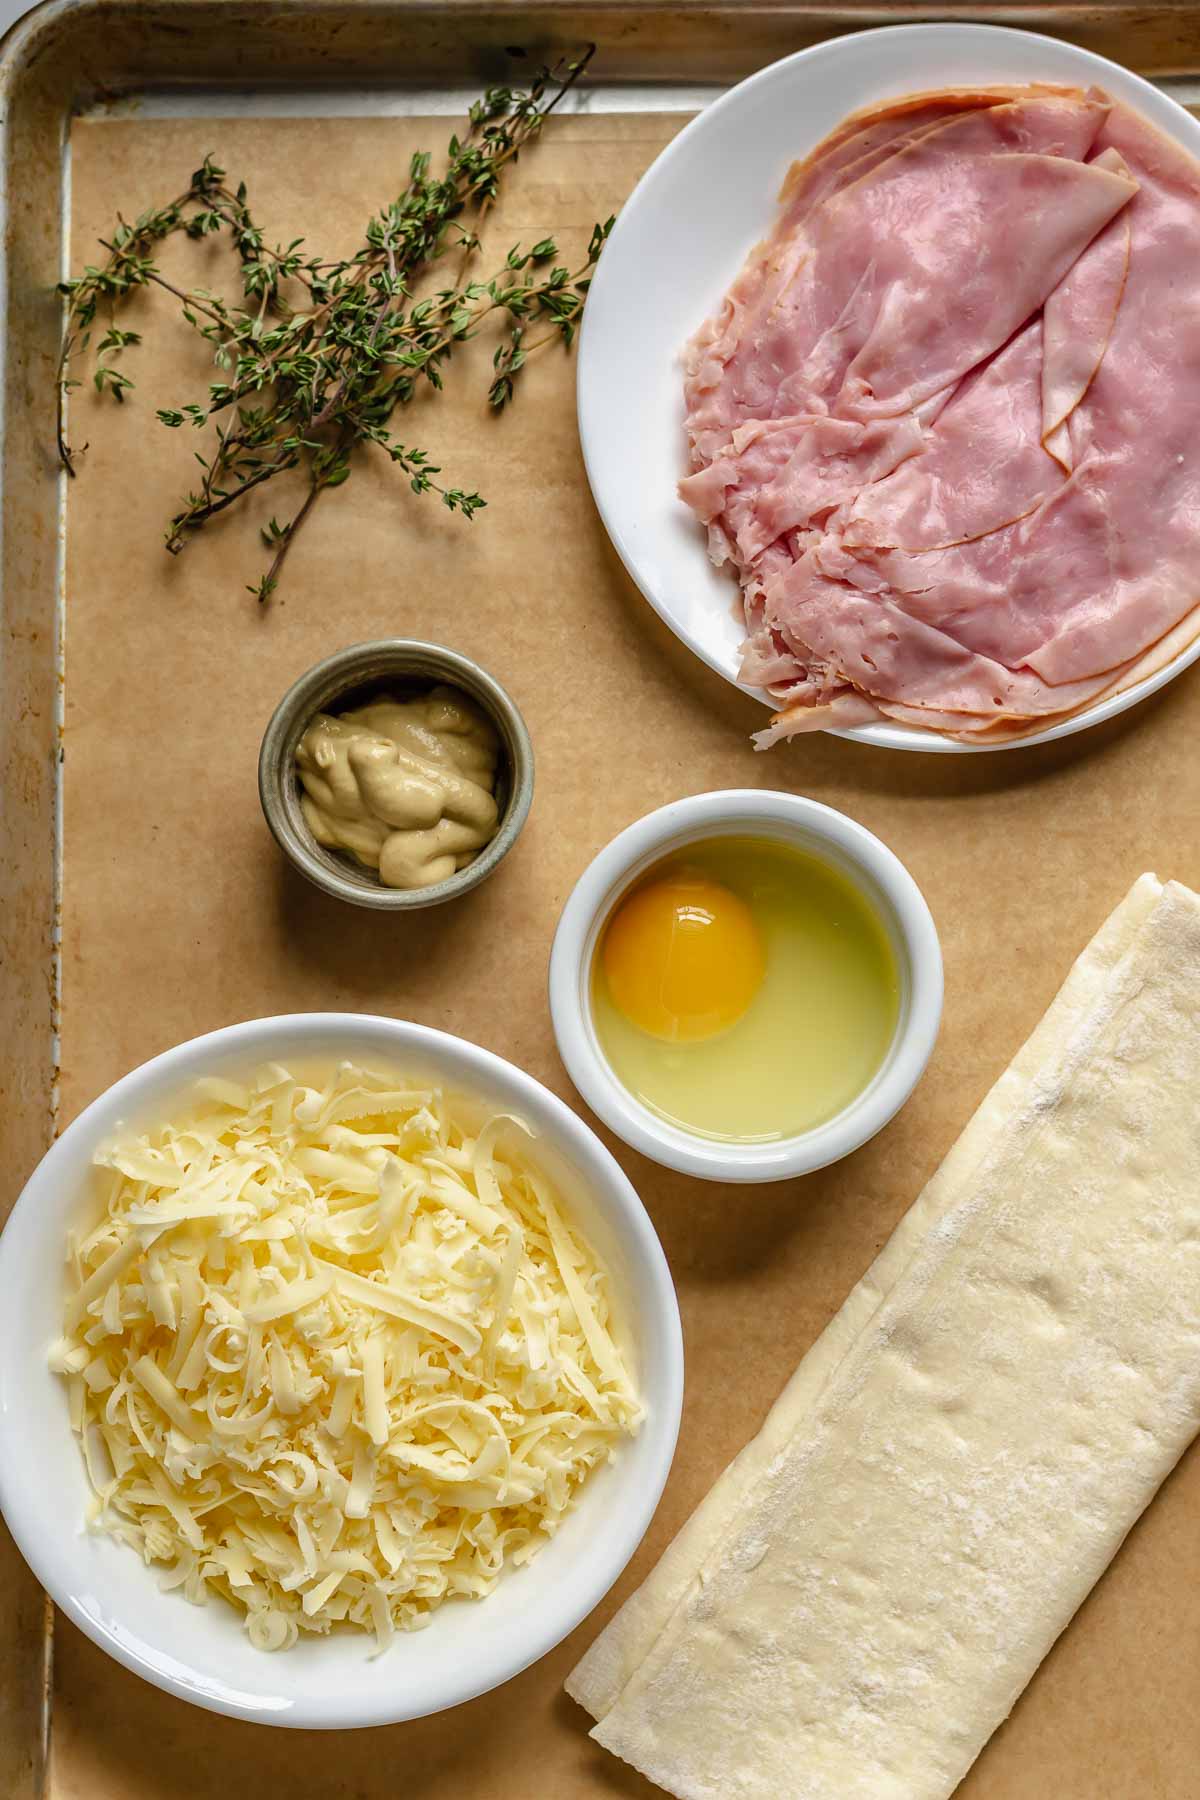 Ingredients for ham and cheese turnovers